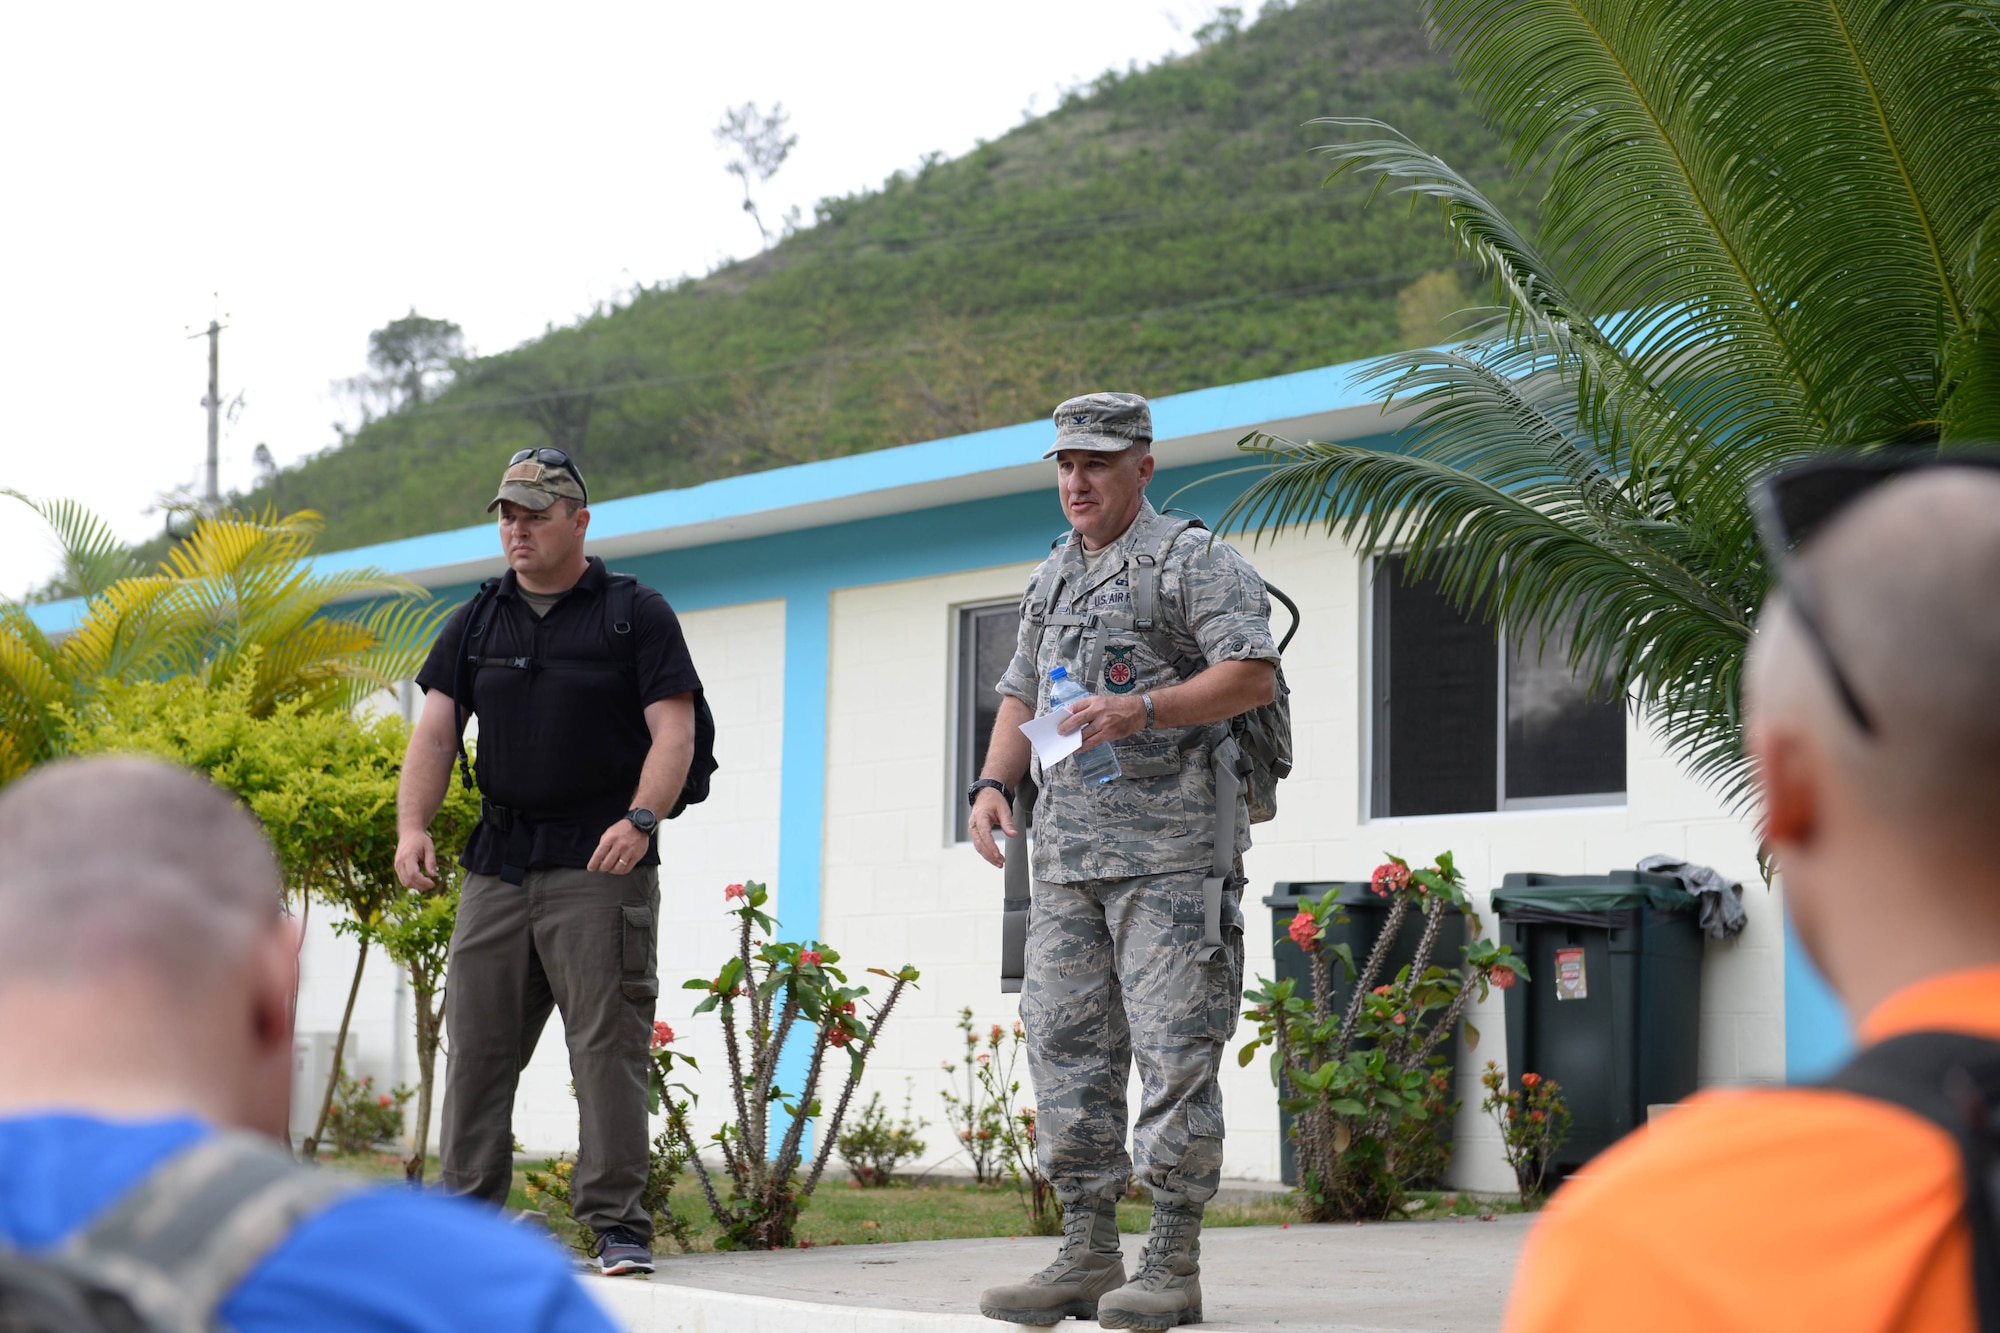 U.S. Air Force Col. Michael Wehmeyer, the 346th Air Expeditionary Group commander, speaks to service members prior to the Sexual Assault Prevention and Response 5K Ruck March in Arroyo Cano, Dominican Republic, April 9, 2017. The goal of the 5K was to raise awareness and promote the prevention of sexual violence through educational awareness. (U.S. Air Force photo by Staff Sgt. Timothy M. Young)